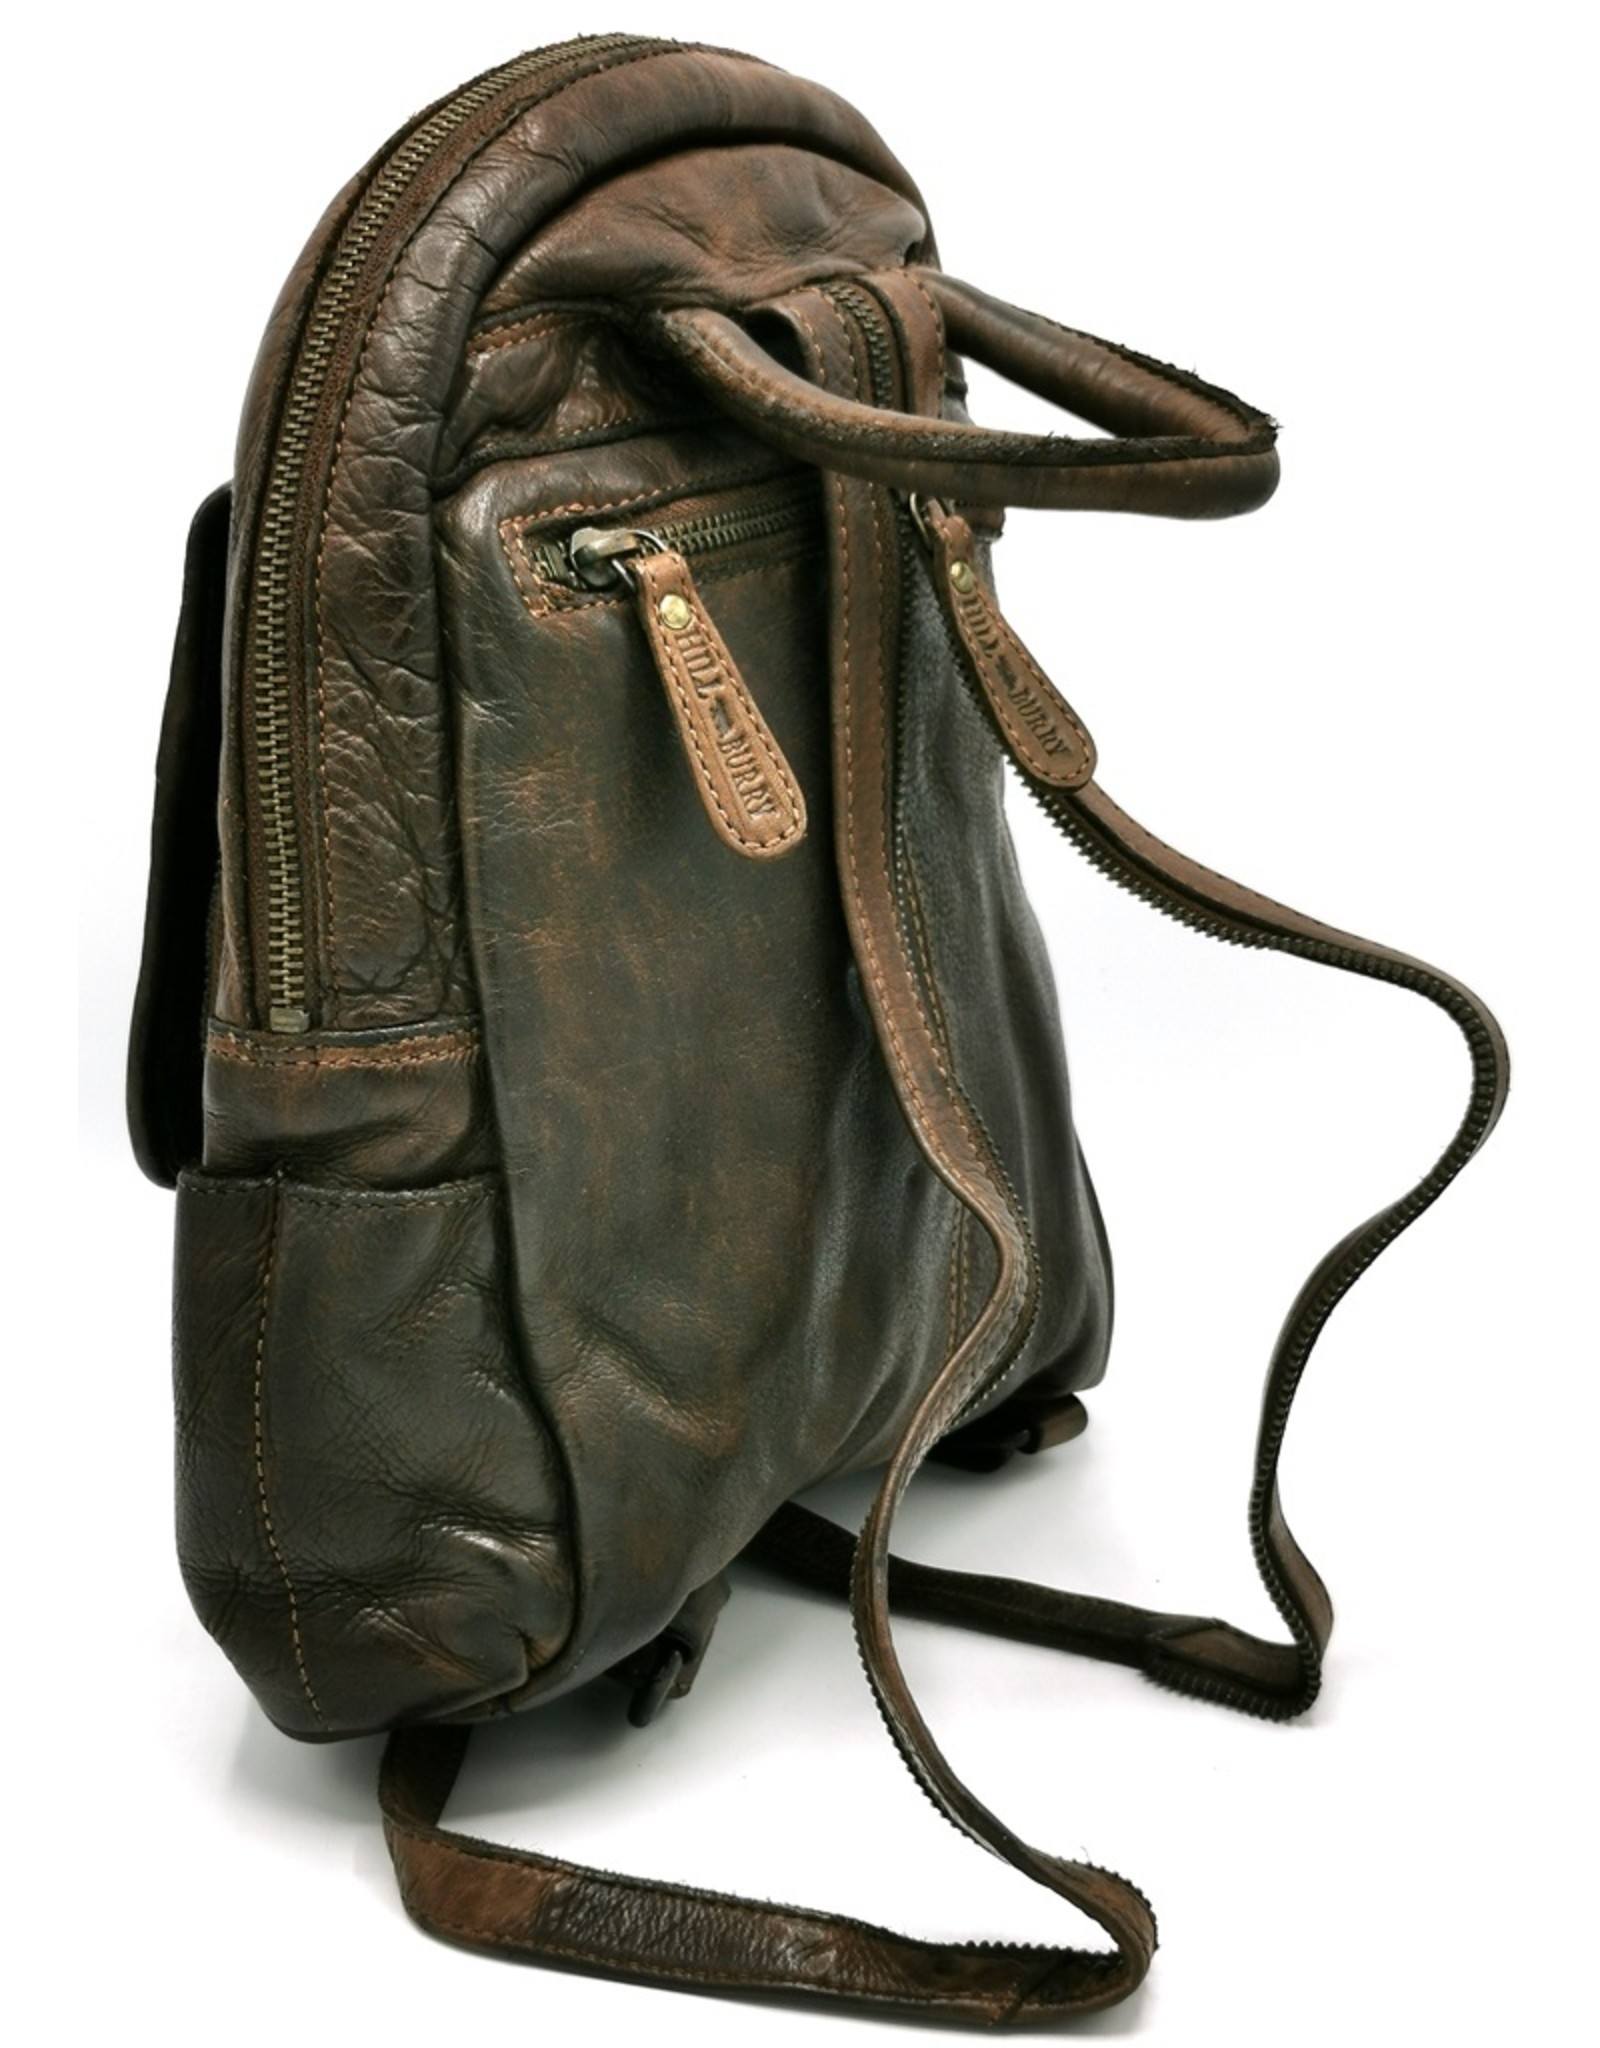 HillBurry Leather bags -  HillBurry backpack Washed Buffalo leather brown